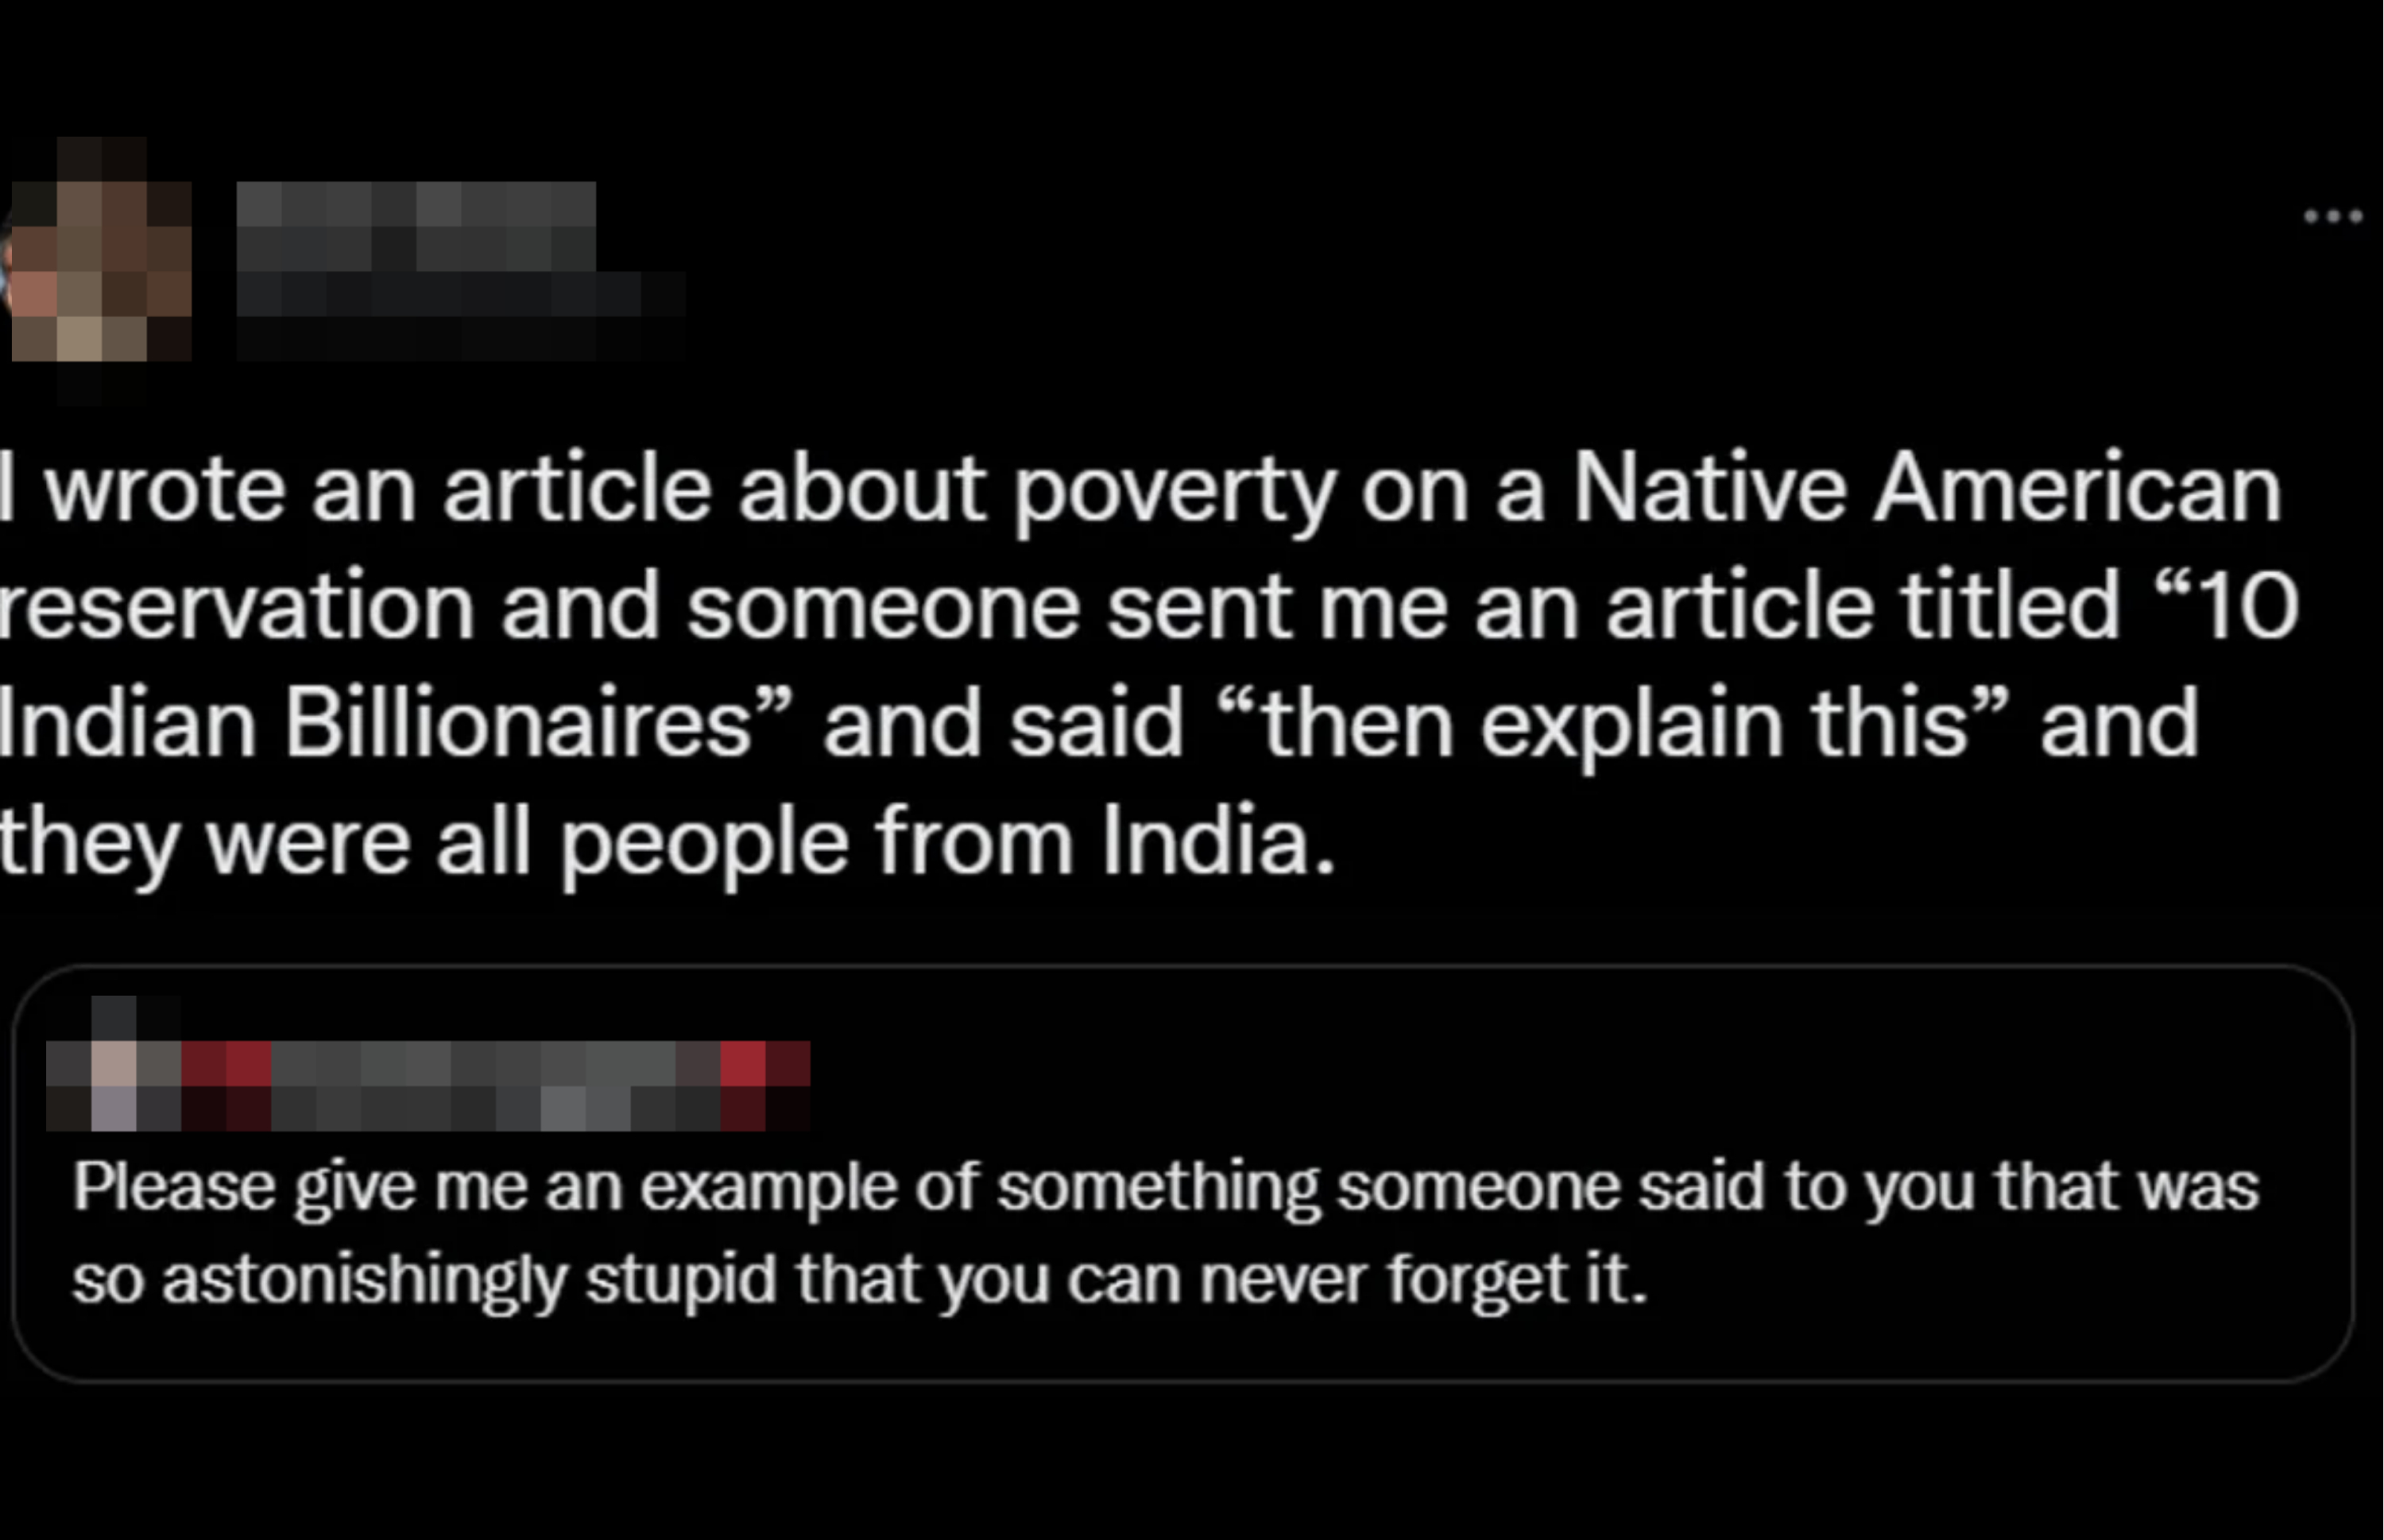 &quot;and they were all people from India.&quot;